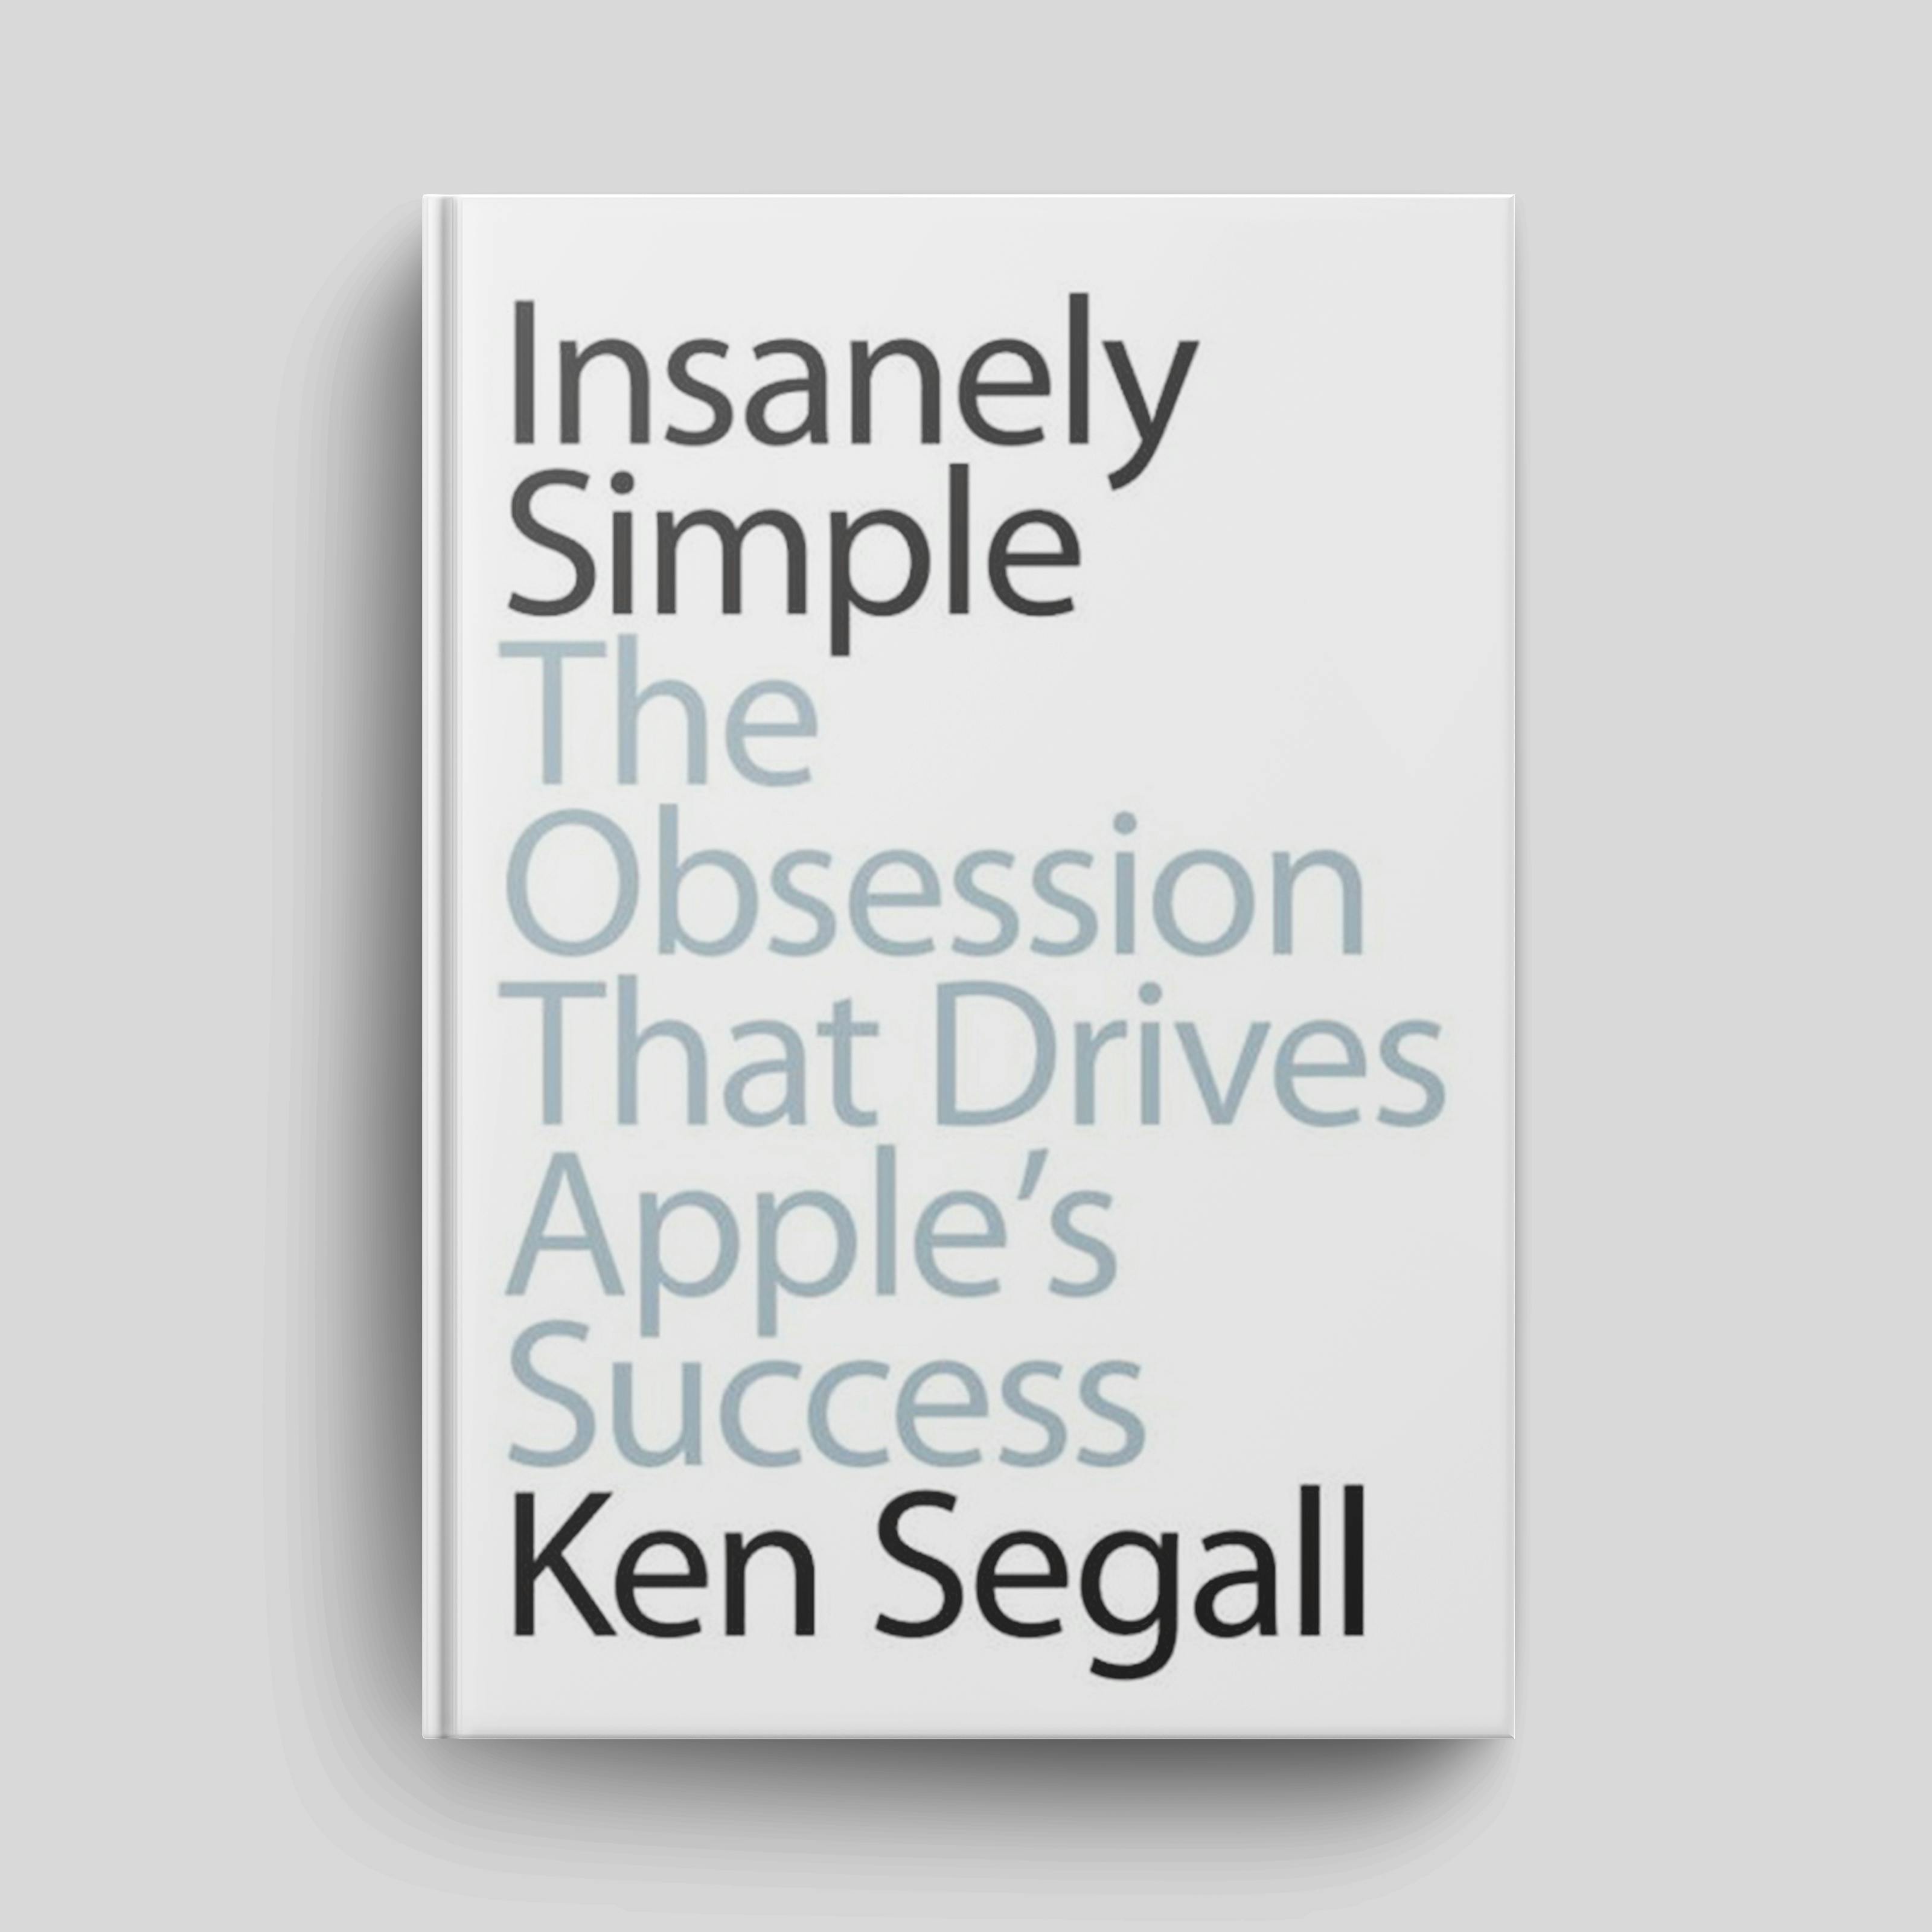 Book: (Part 1) ”Insanely Simple: The Obsession That Drives Apple’s Success” | Episode #174 (Part 1 of 2)